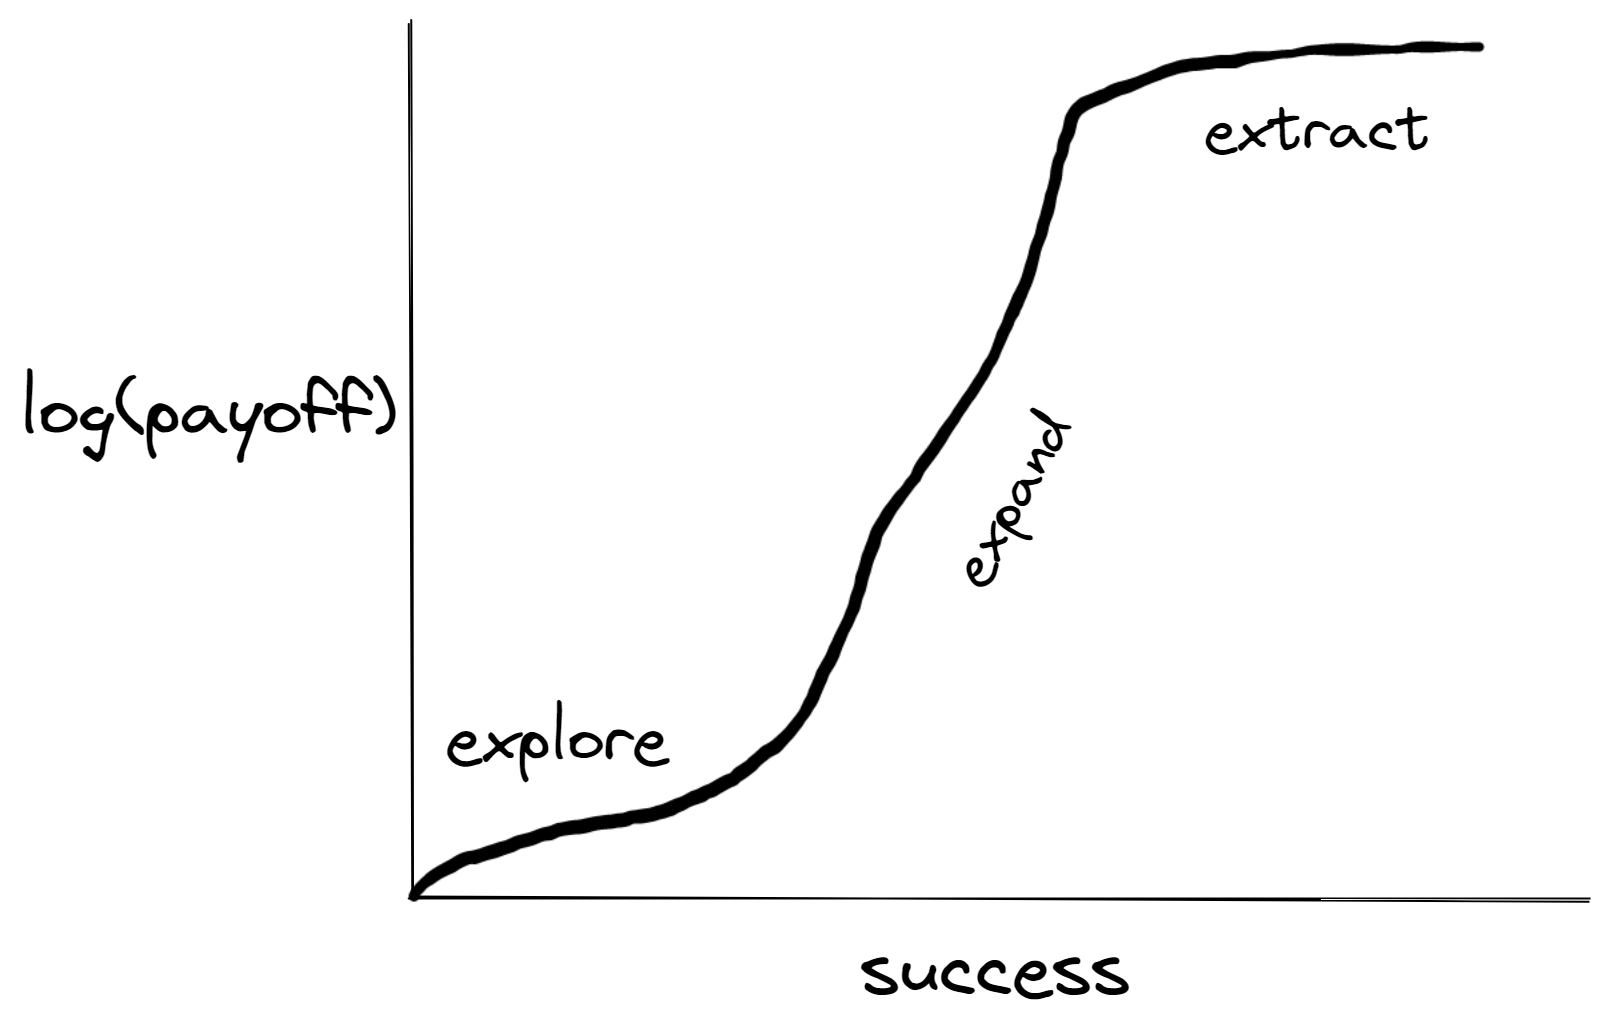 S-curve showing the various stages of a project: explore, expand, extract.